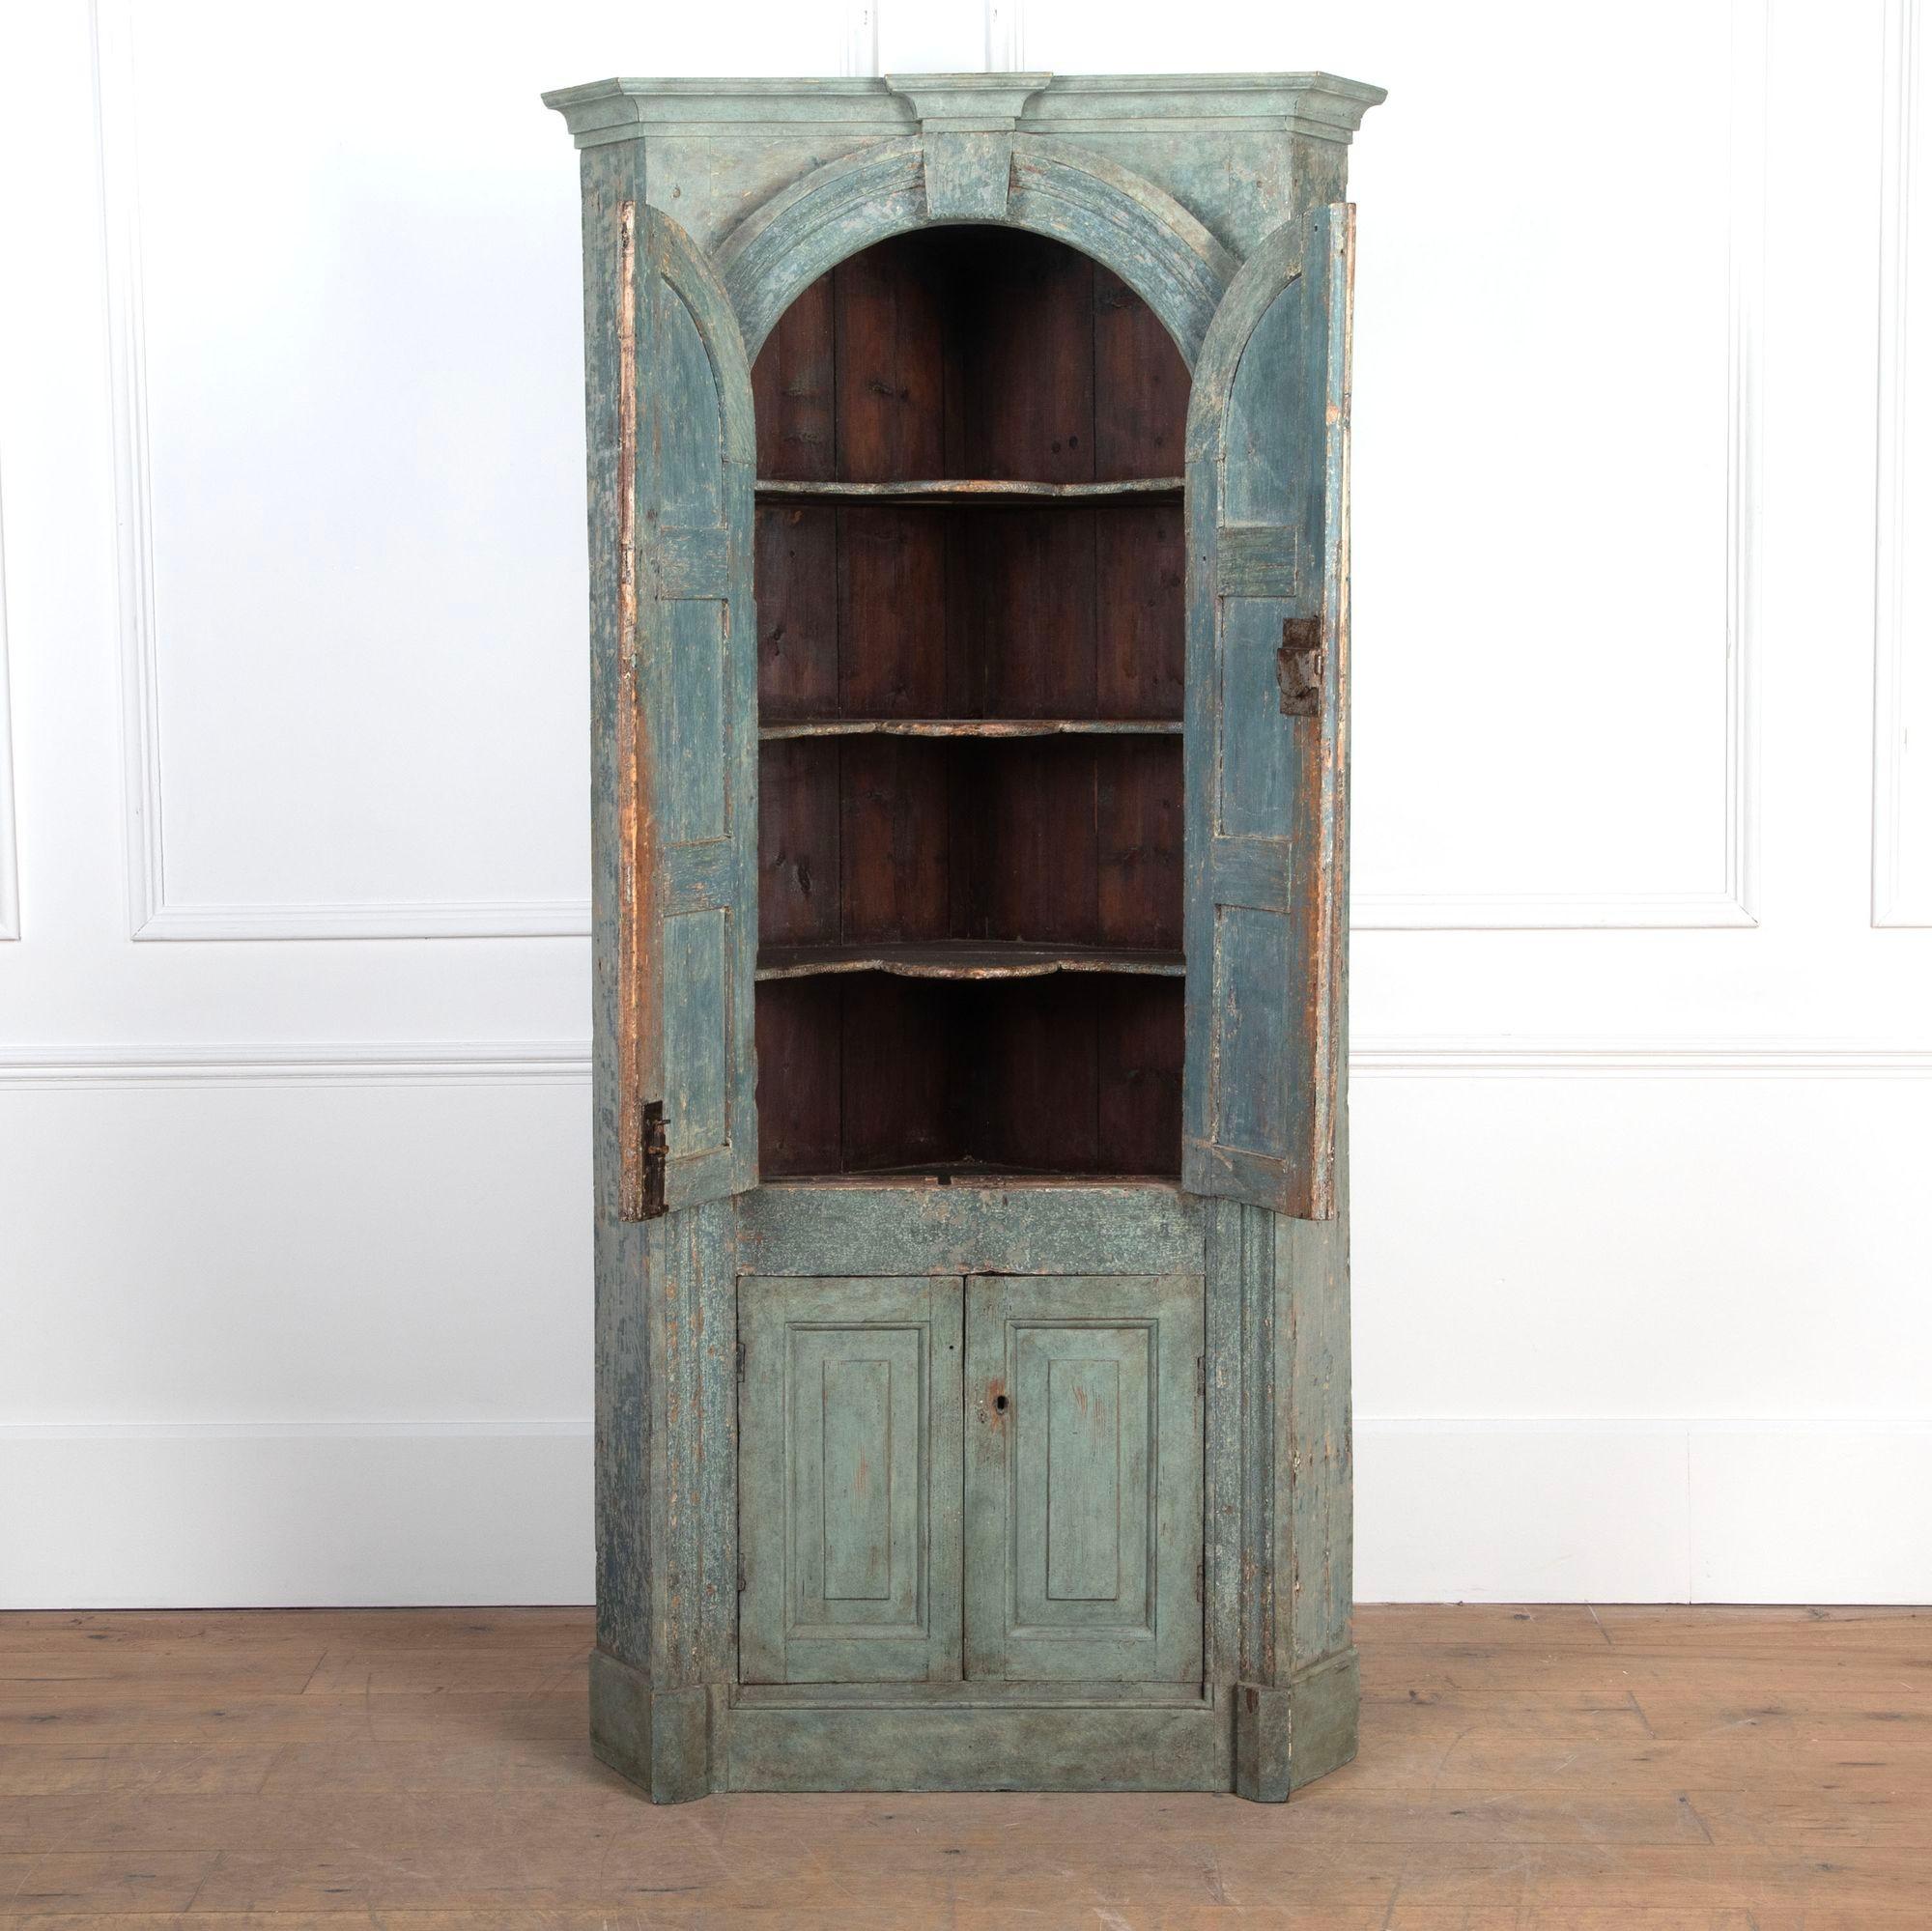 Wonderful decorative late 18th Century floor standing pine corner cupboard.
Creatively dry scraped back to reveal layers of original blue paint.
English, circa 1780.